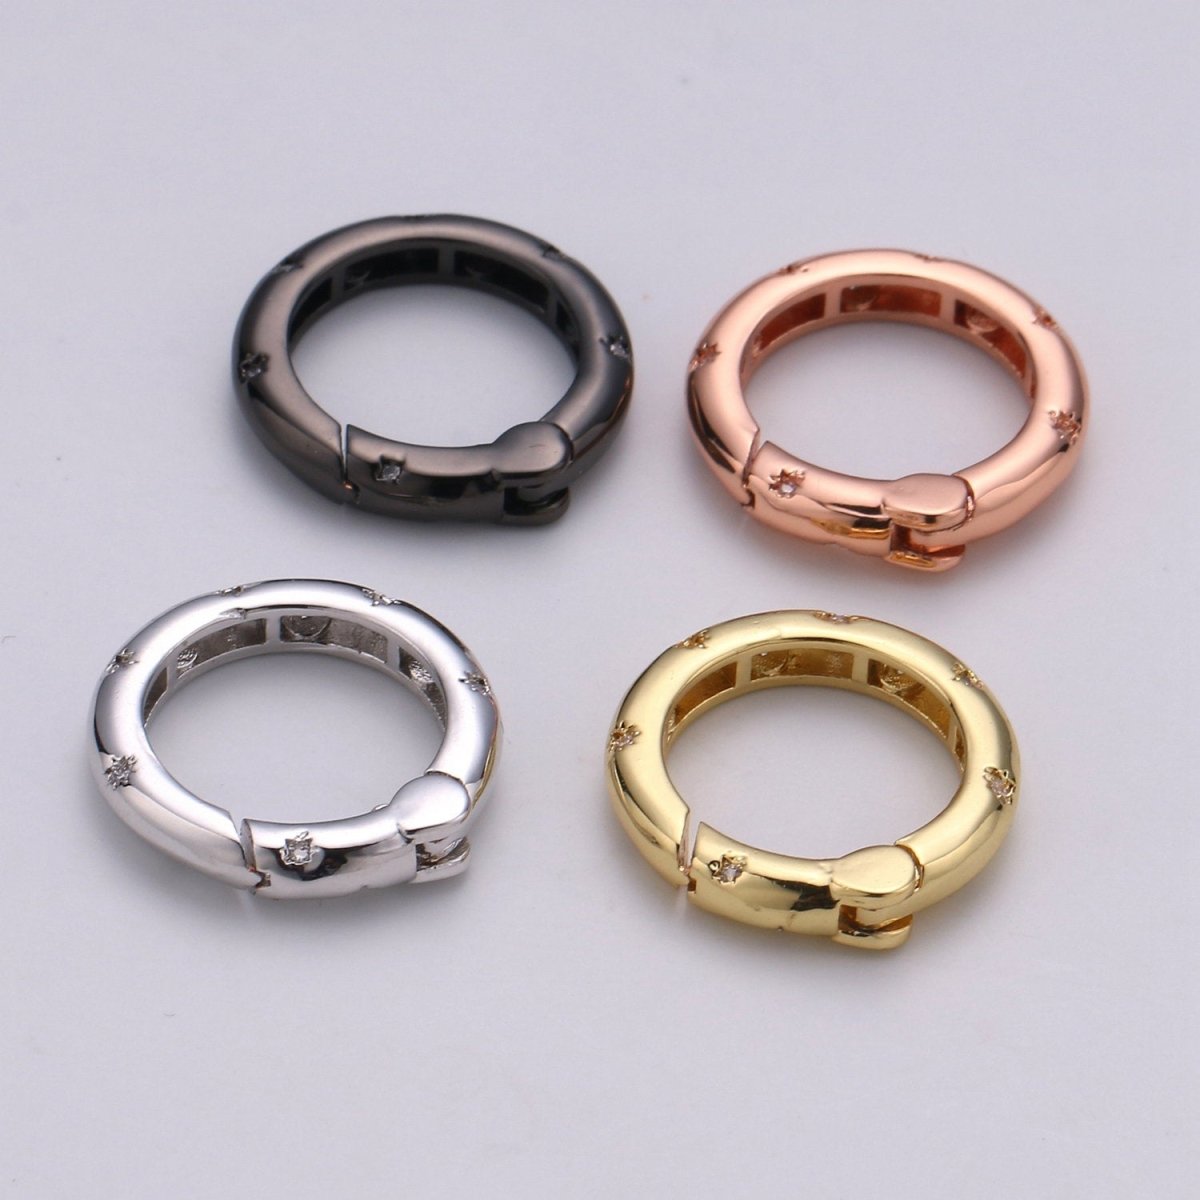 Cz Gold Spring Gate Ring, Push Gate ring, 20mm Round Ring Charm Holder Rose Gold Black Gun Metal Silver Clasp for Connector Charm Holder K-851 - DLUXCA